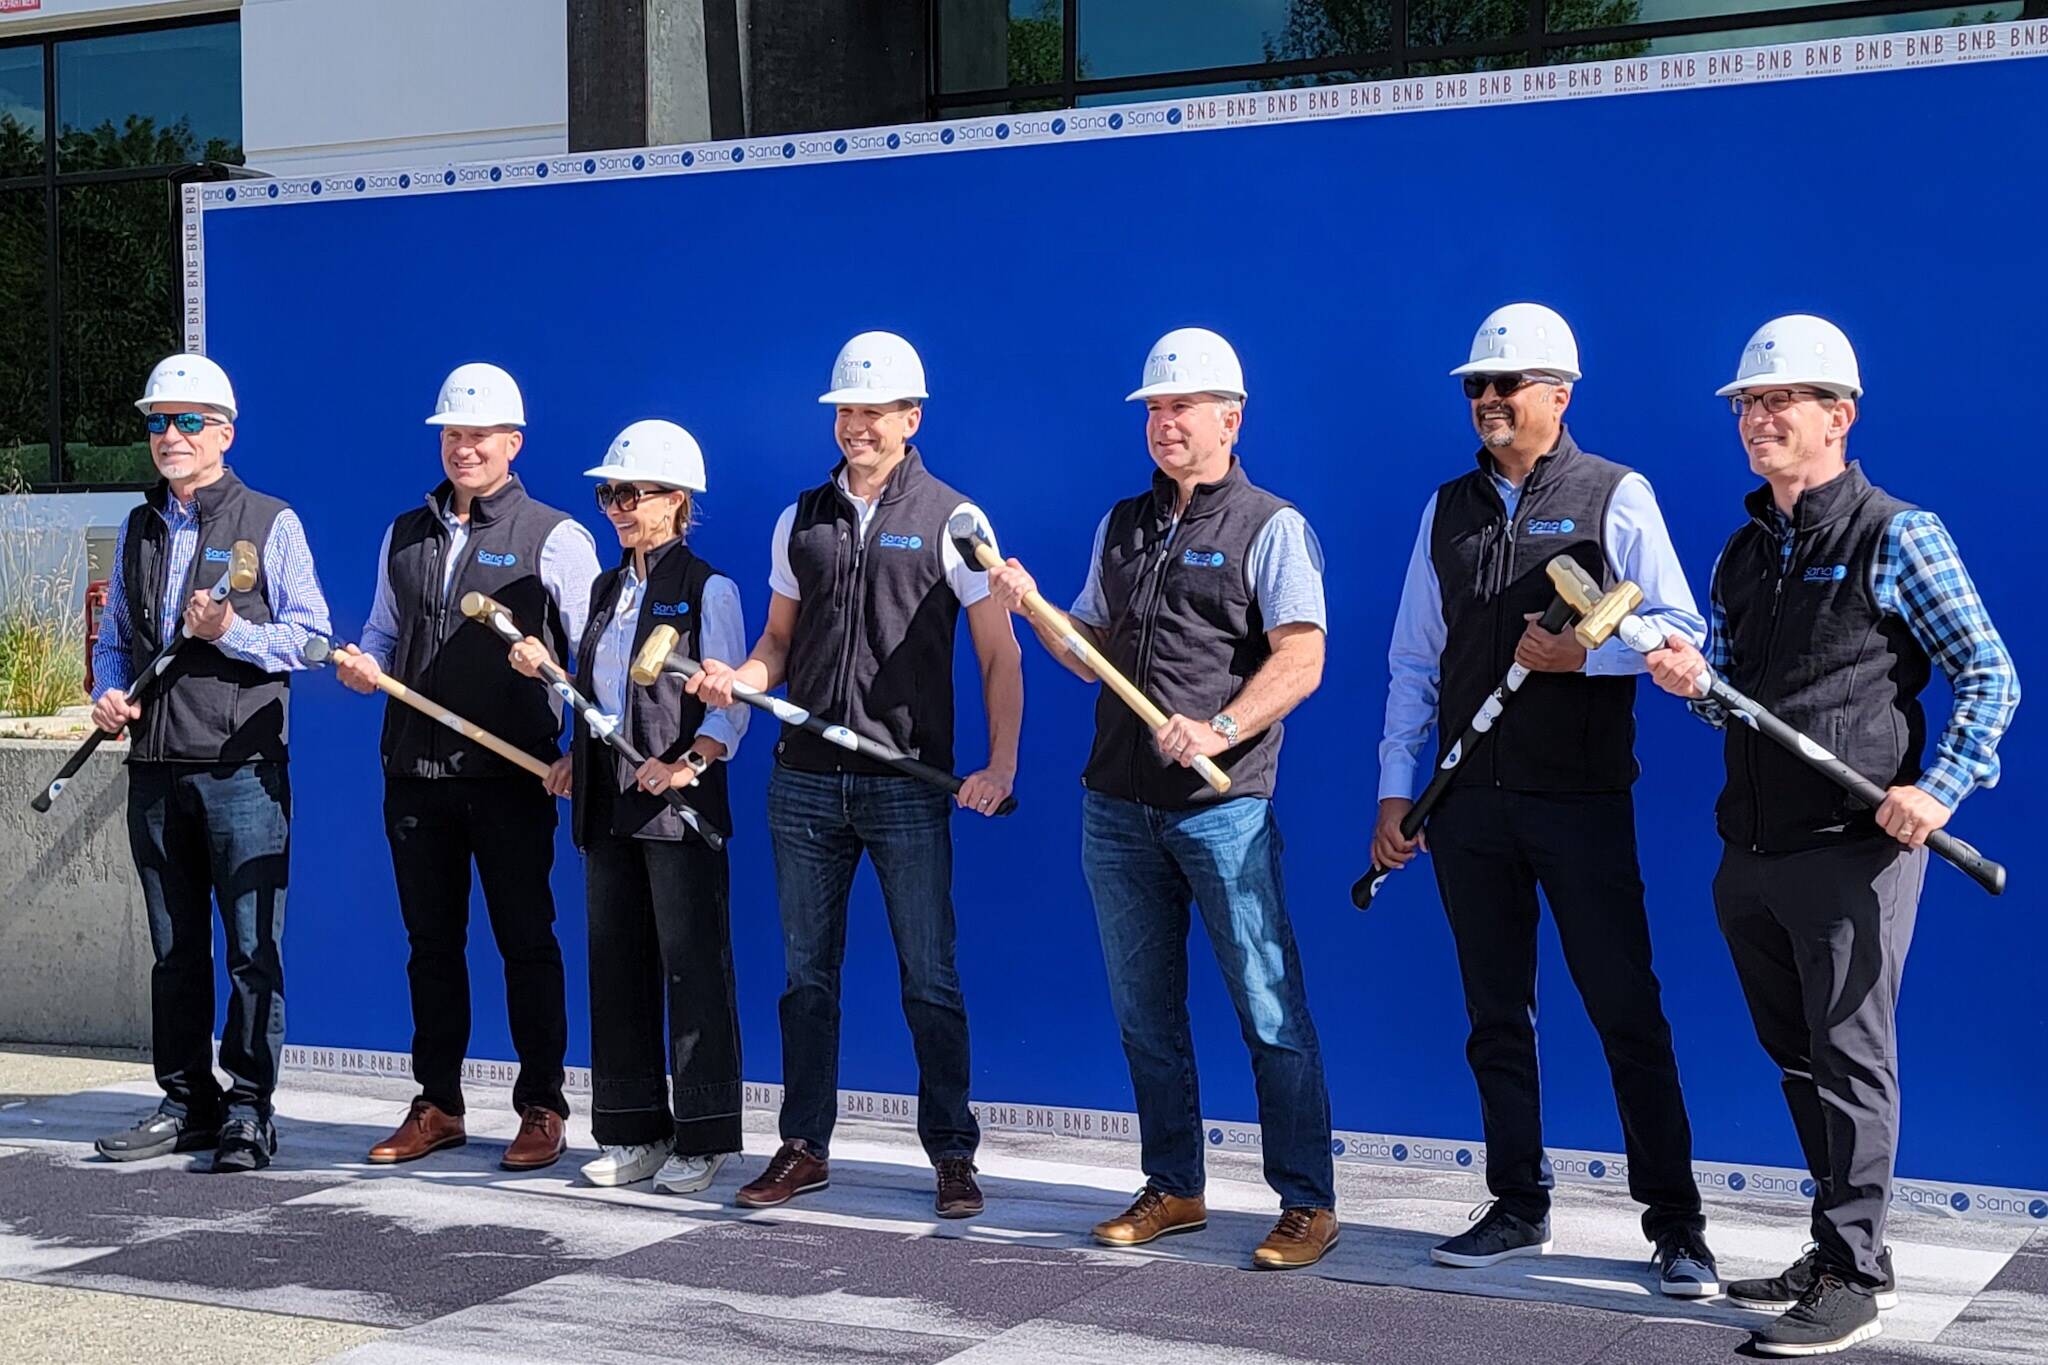 Sana Biotechnology breaks ground on a new 80,000 square foot manufacturing facility in Bothell on July 25. The company develops cell and gene-based medical treatments. July 25, 2023. (Sana Biotechnology)